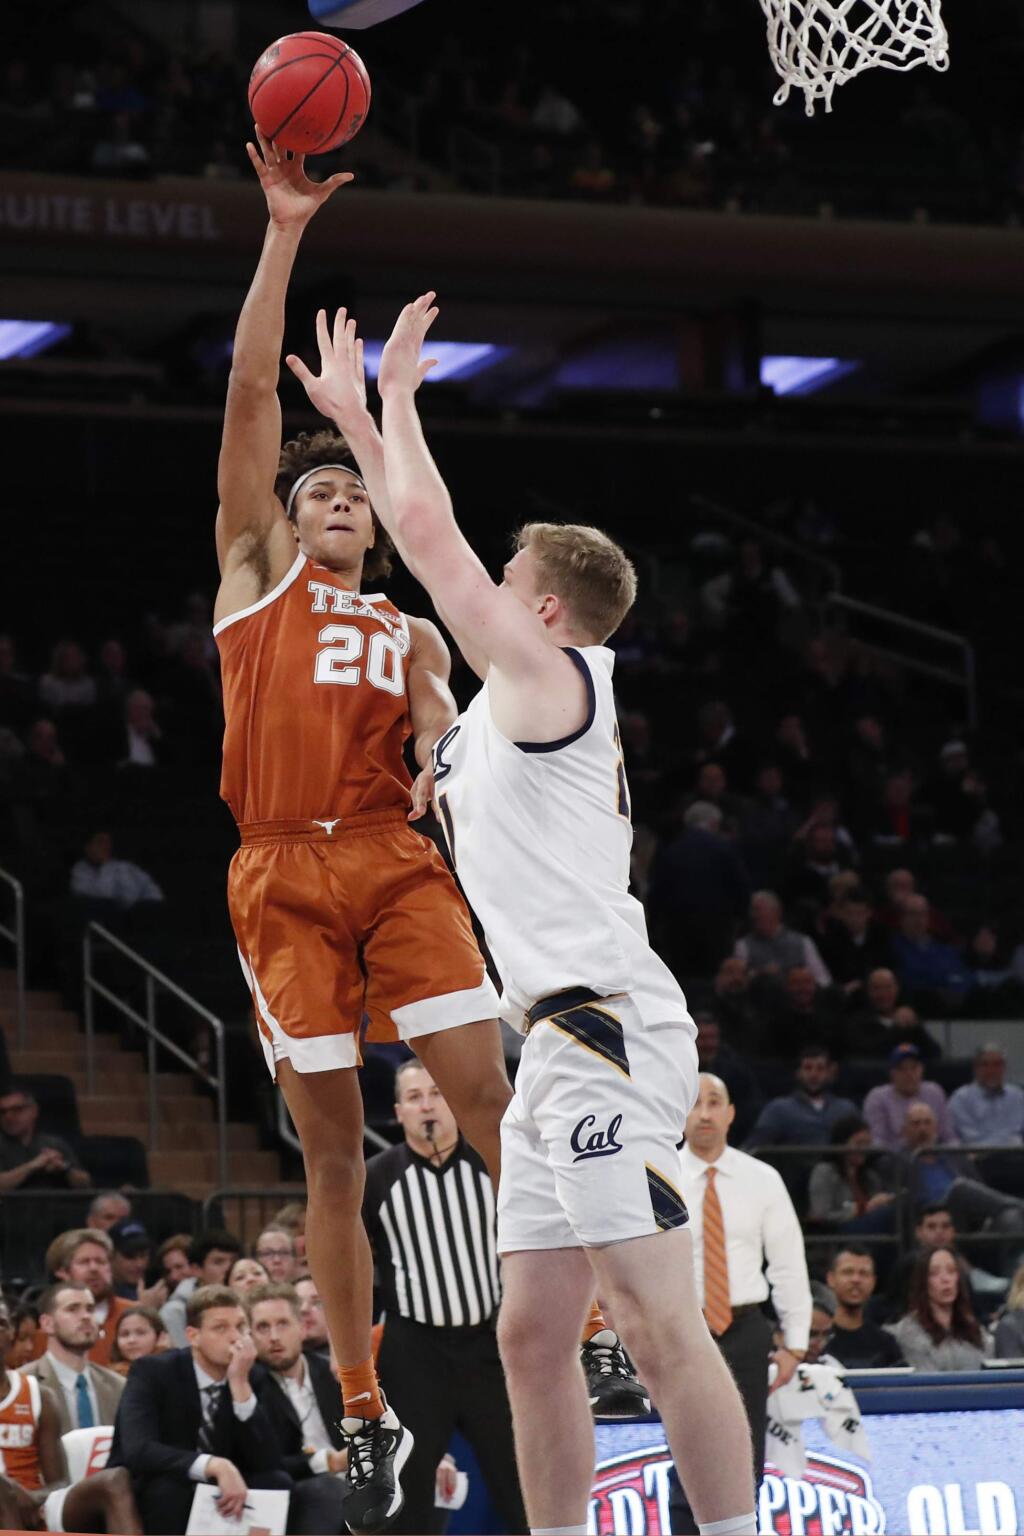 Texas forward Jericho Sims (20) passes around Cal forward Lars Thiemann (21) during the second half in the 2K Empire Classic, Thursday, Nov. 21, 2019, in New York. (AP Photo/Kathy Willens)